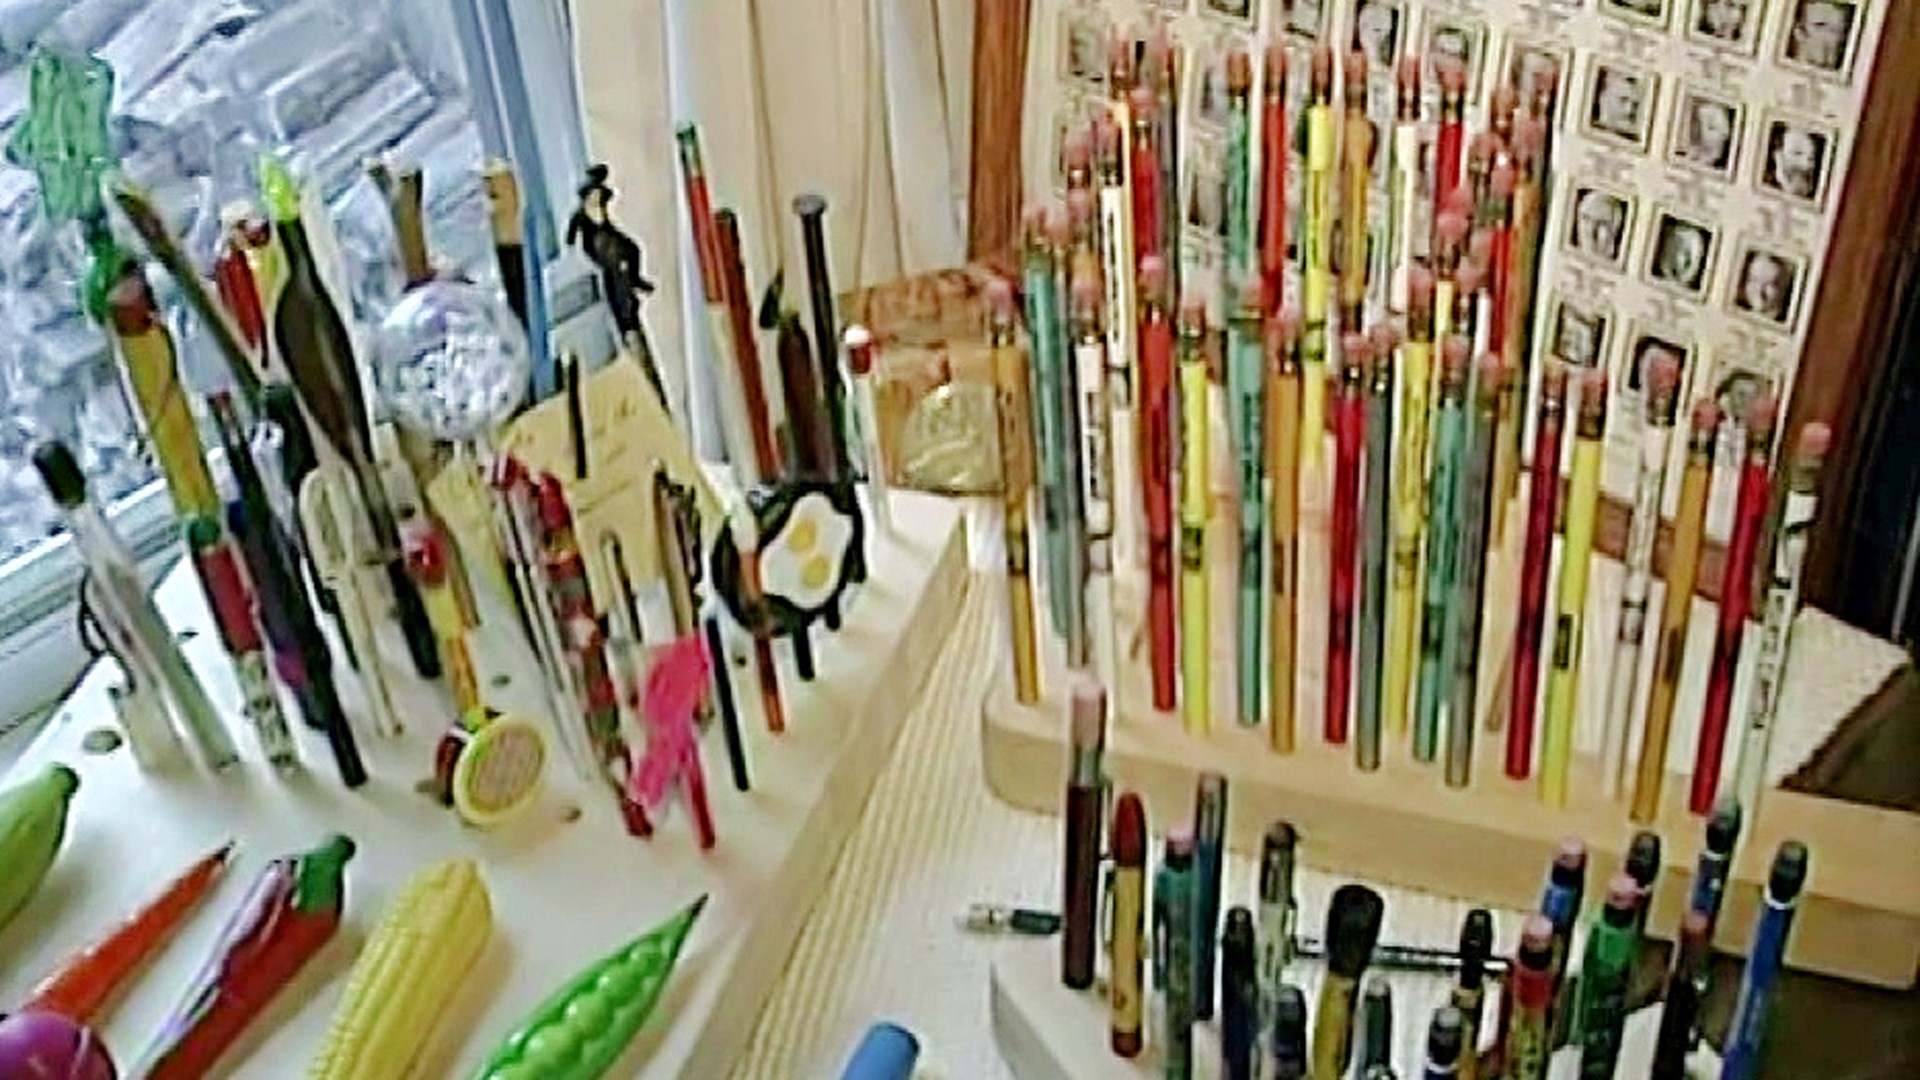 In 1998, Mike Stevens visited a woman in Sullivan County who had a collection of thousands of pencils.